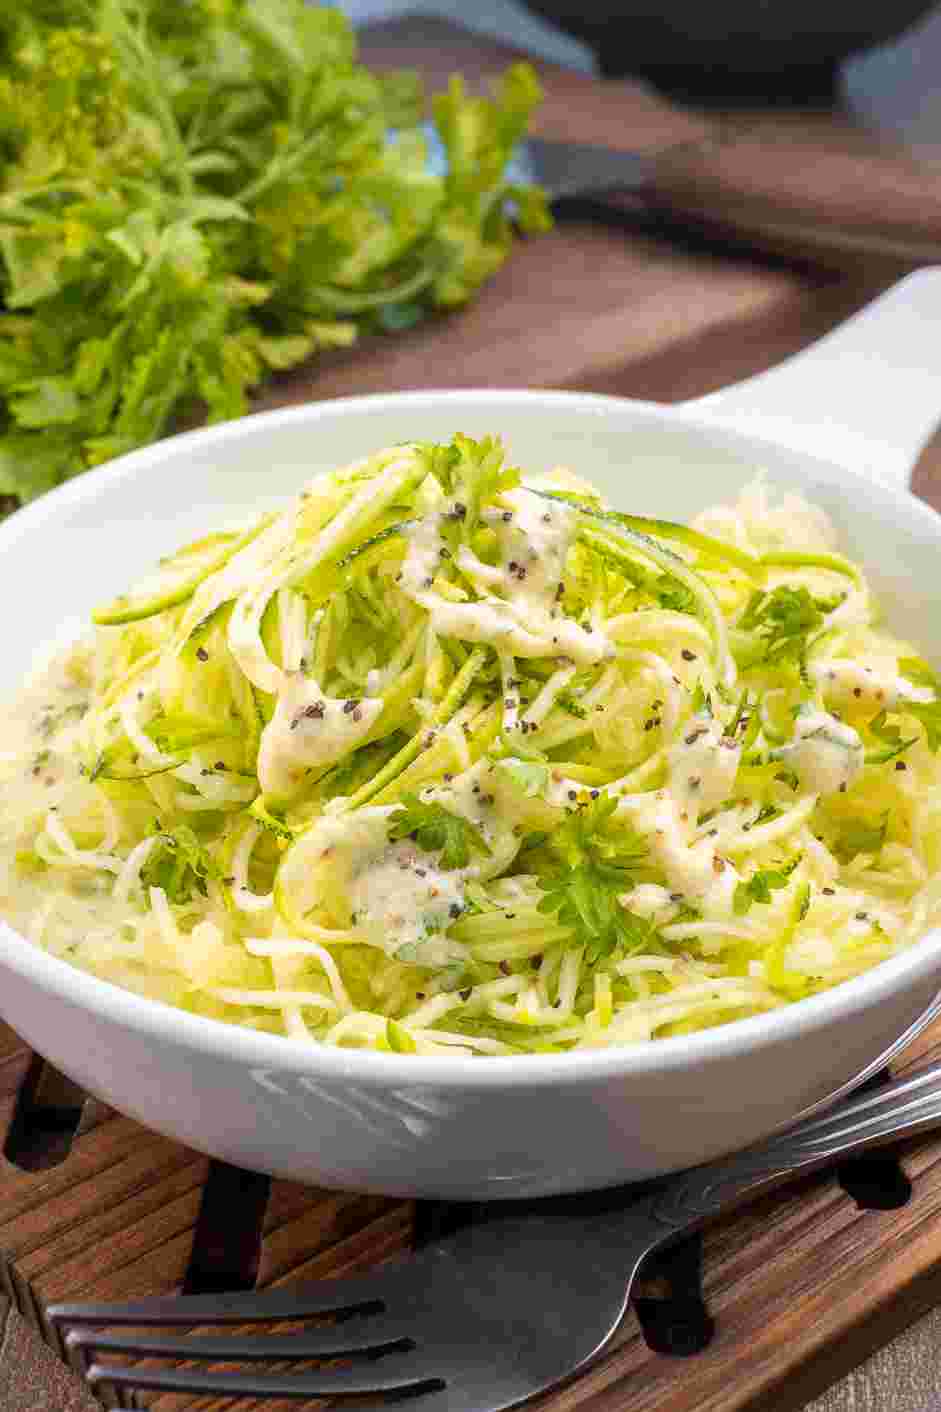 Keto Alfredo Sauce Recipe: Serve the keto alfredo sauce with zucchini noodles, shirataki noodles or any other low-carb friendly pasta.